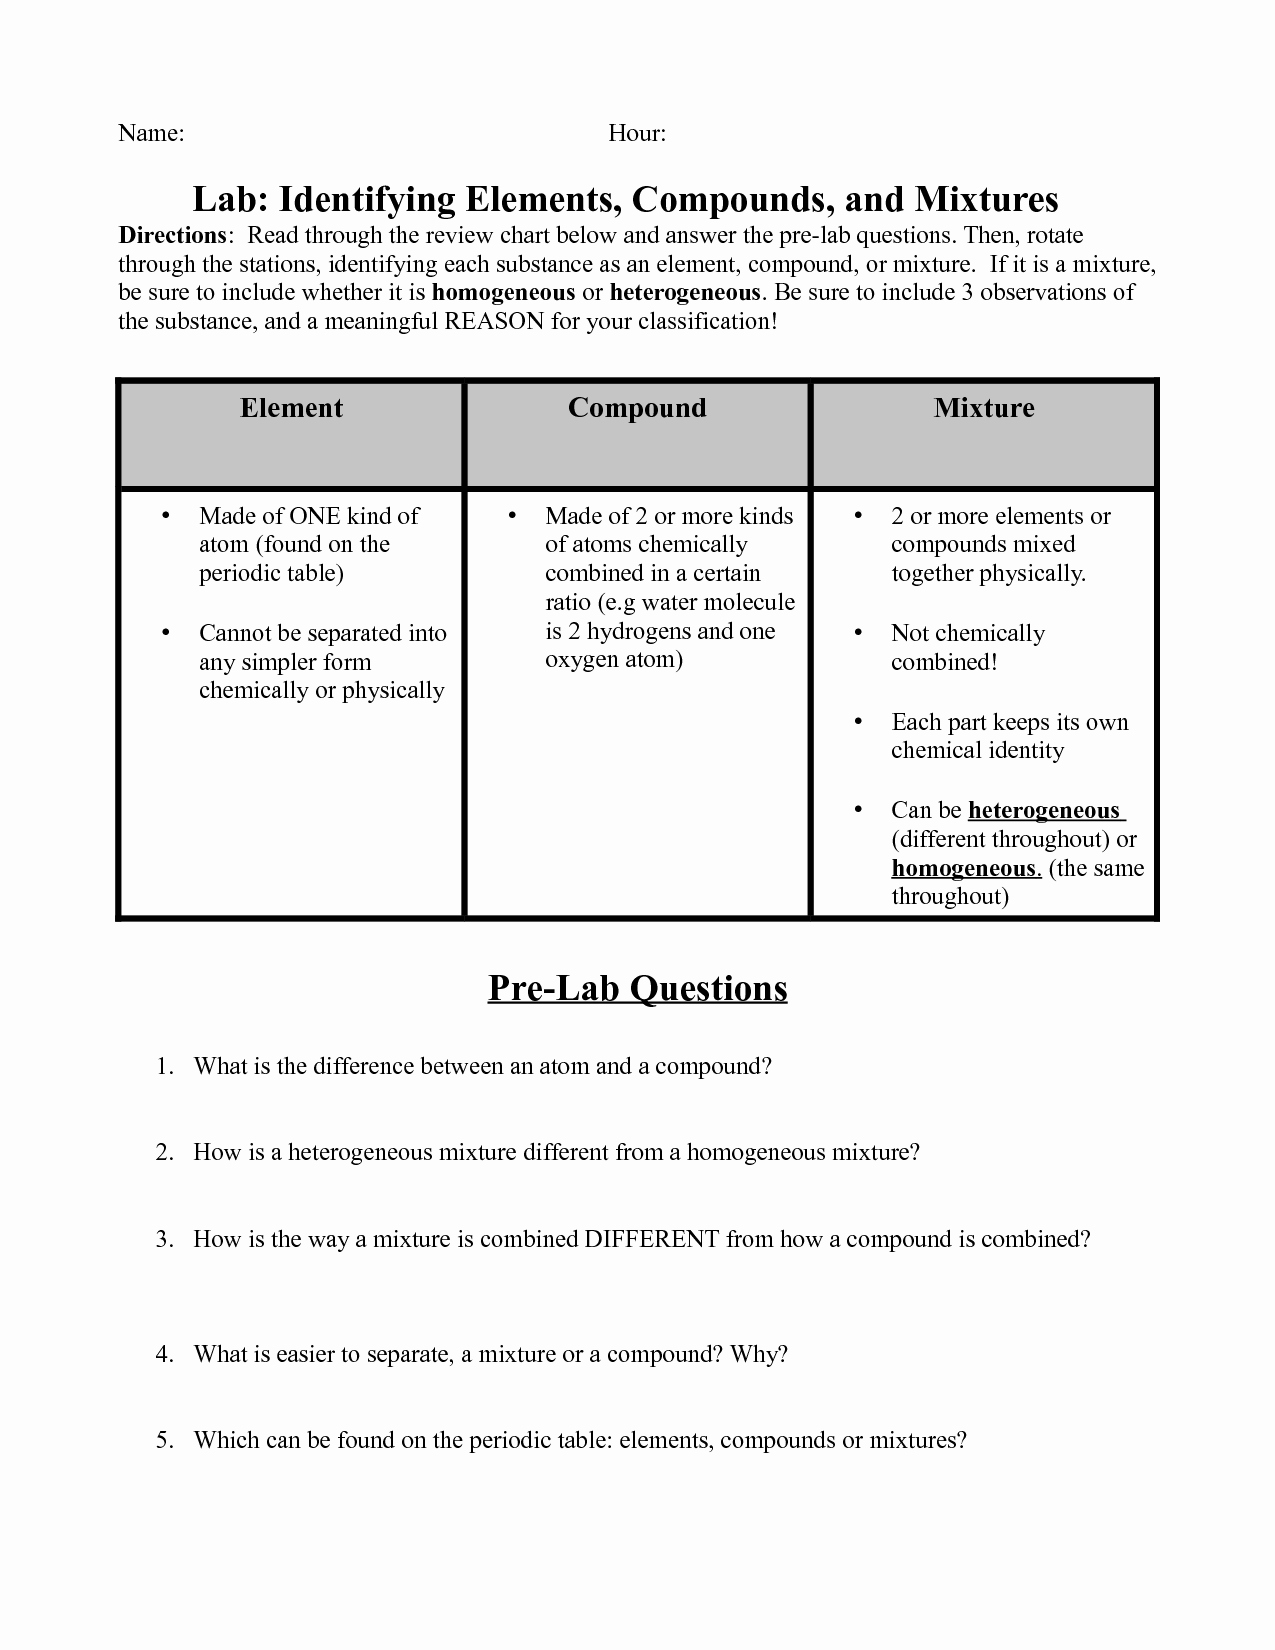 Elements Compounds Mixtures Worksheet Answers Elegant 17 Best Of Elements Pounds and Mixtures